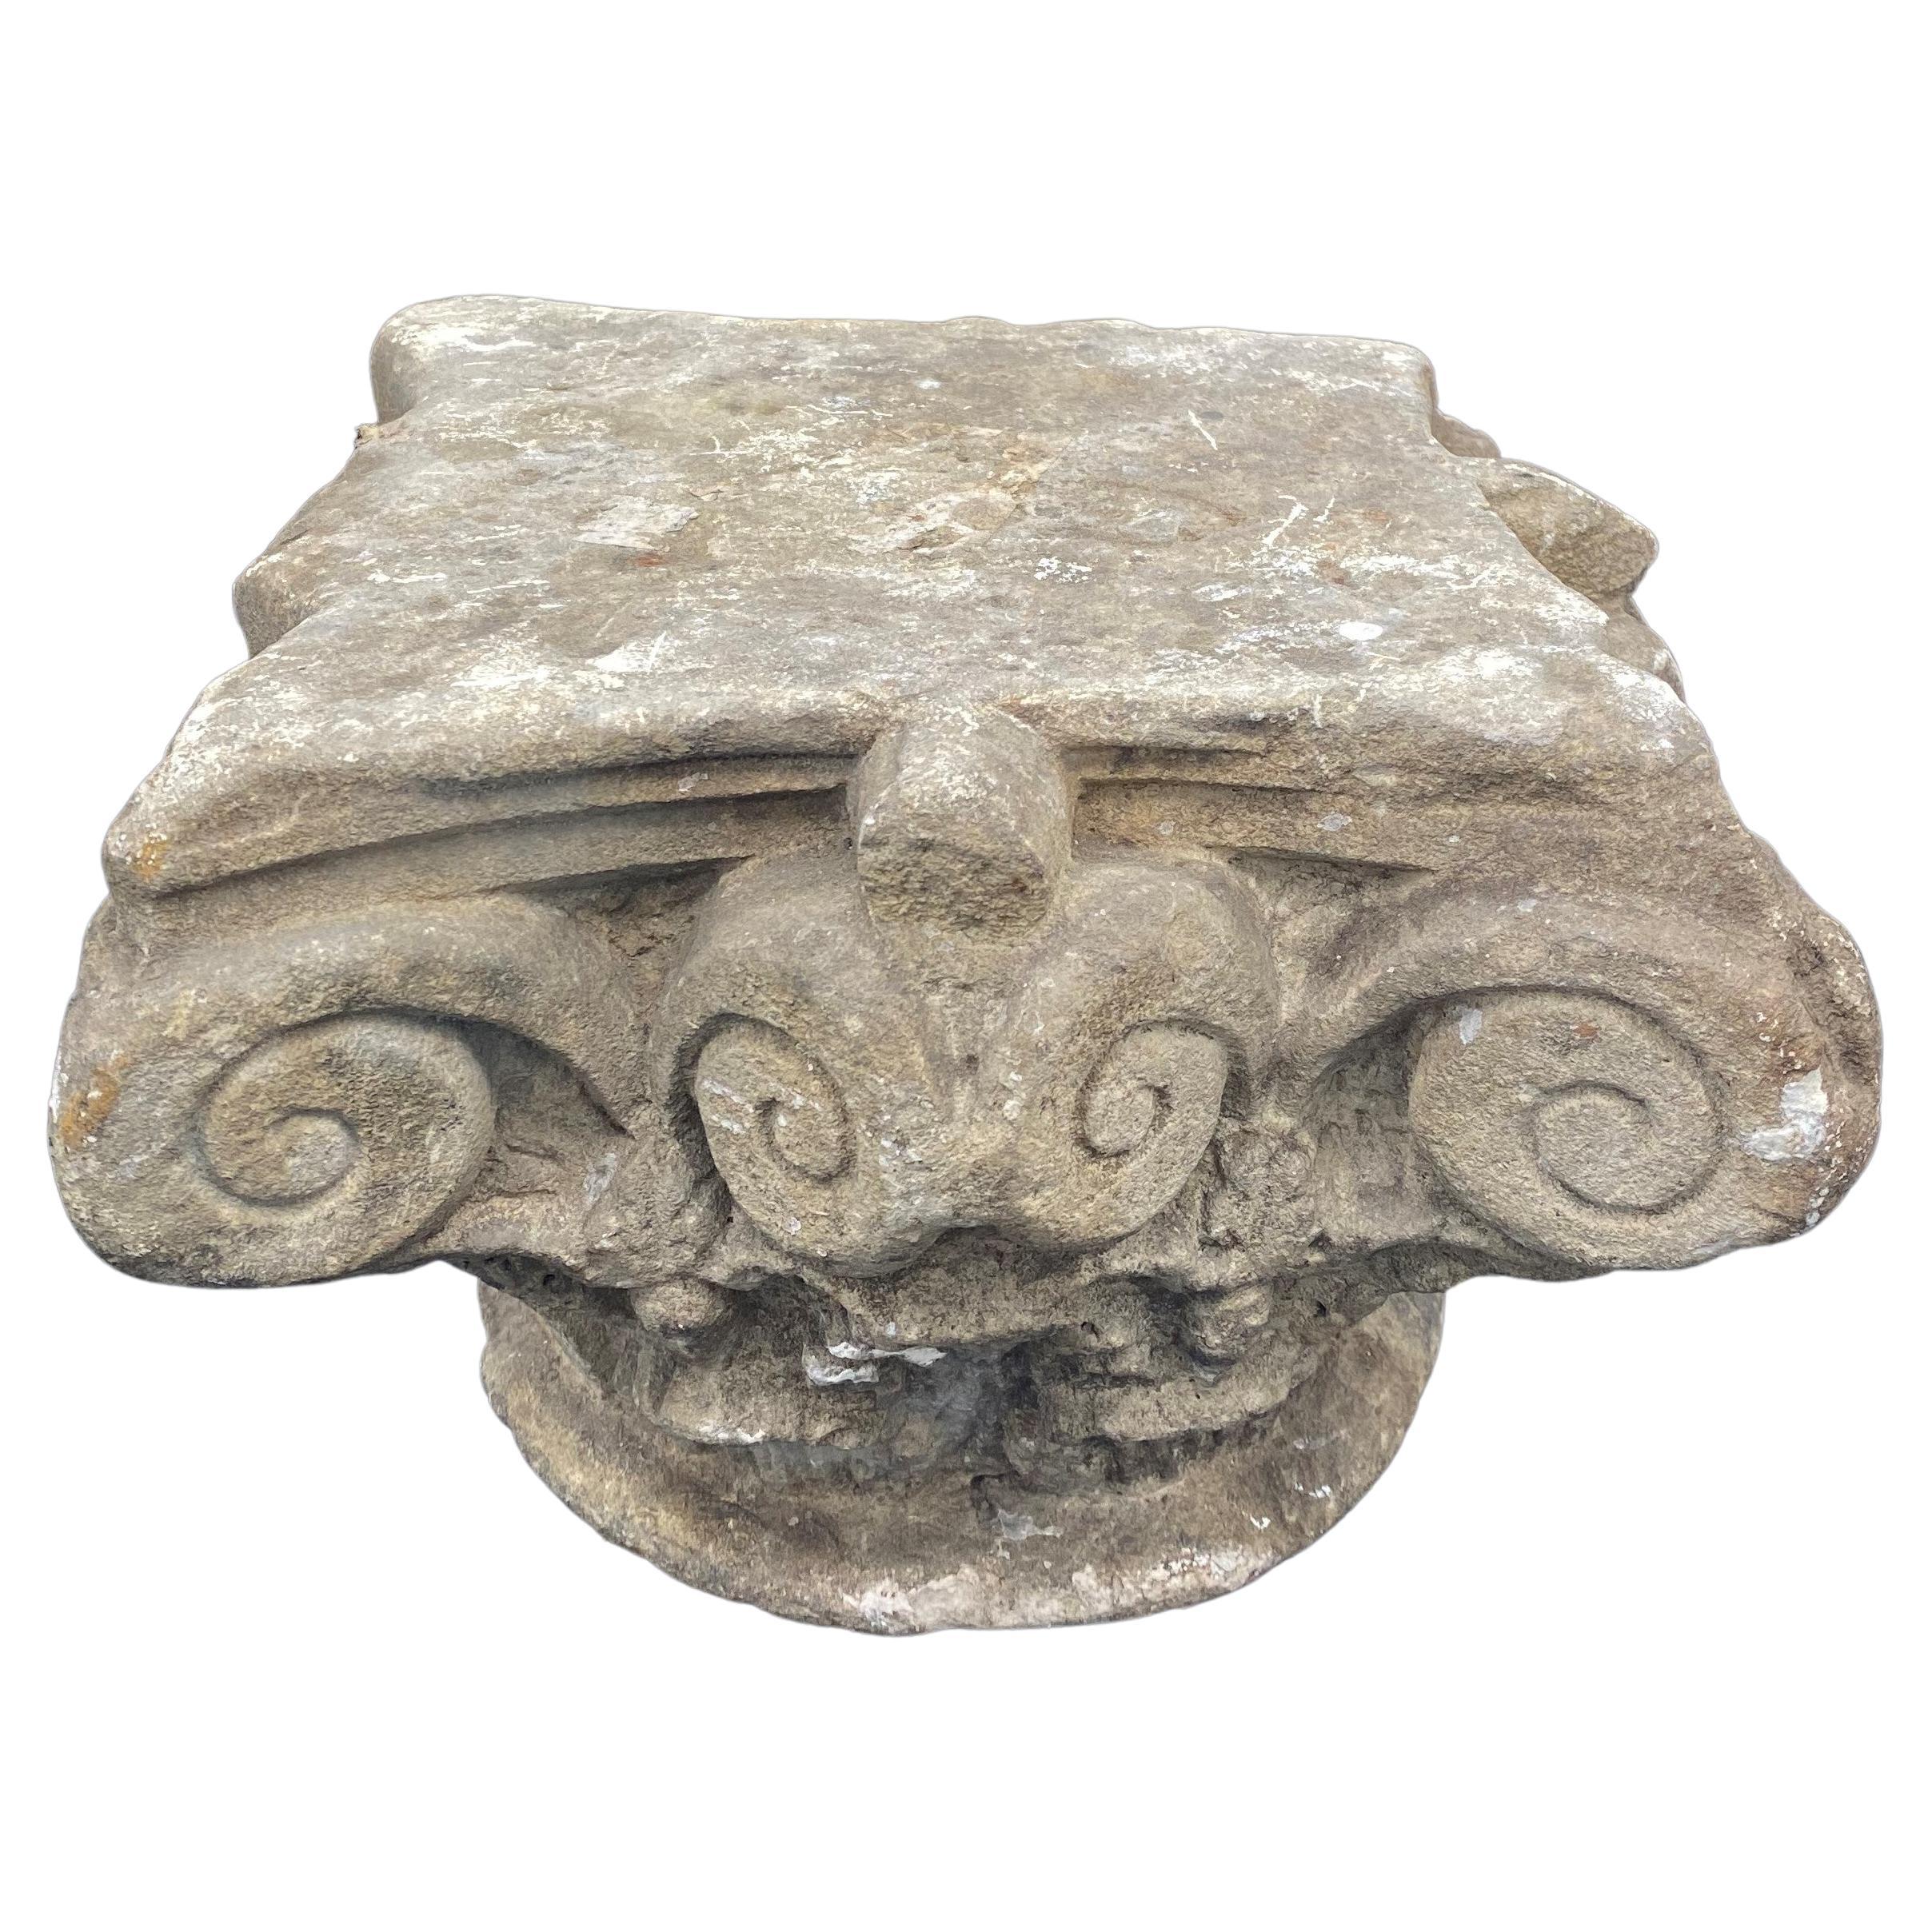 Beautiful antique capital carved in a 12th century limestone. It is decorated with acanthus leaves, as required by the Corinthian architectural traditions.